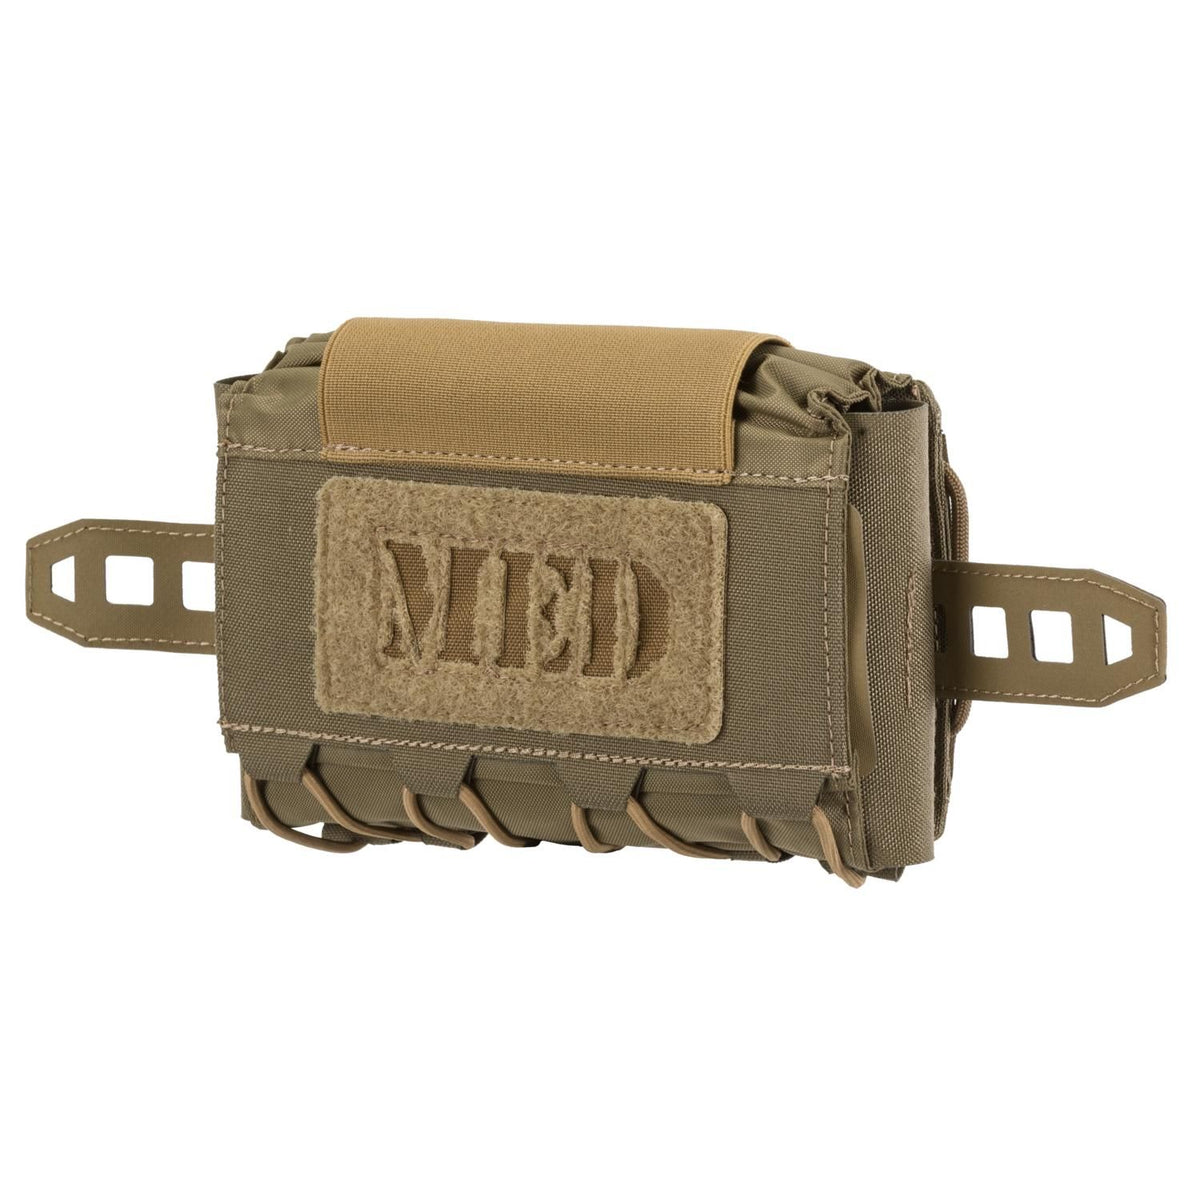 Compact Med Pouch Horizontal - Coyote Brown